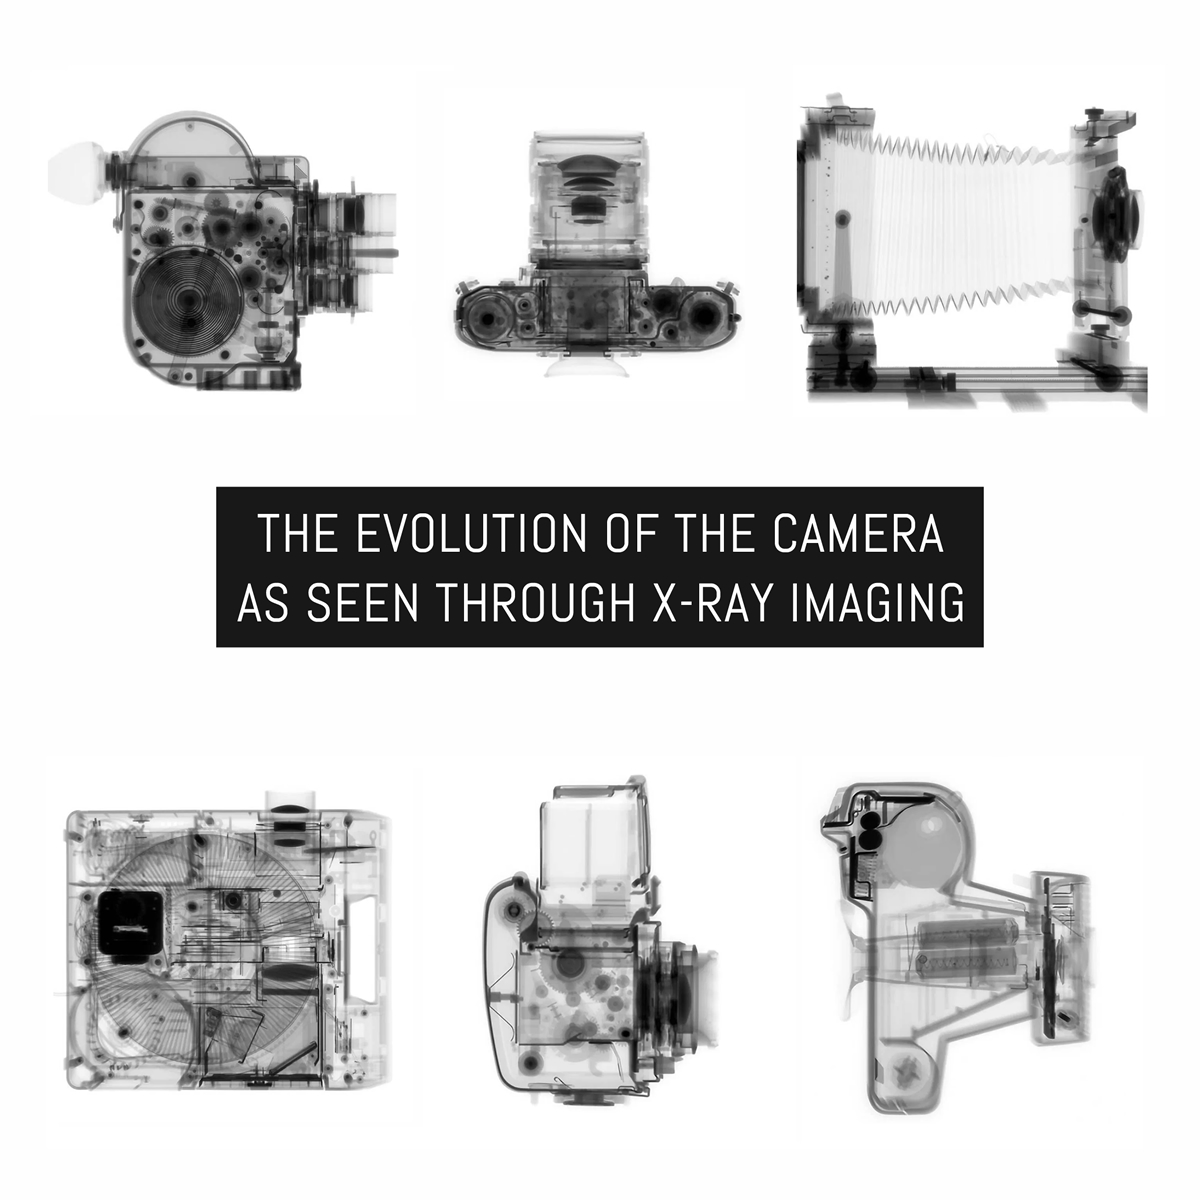 The evolution of the camera as seen through X-ray imaging